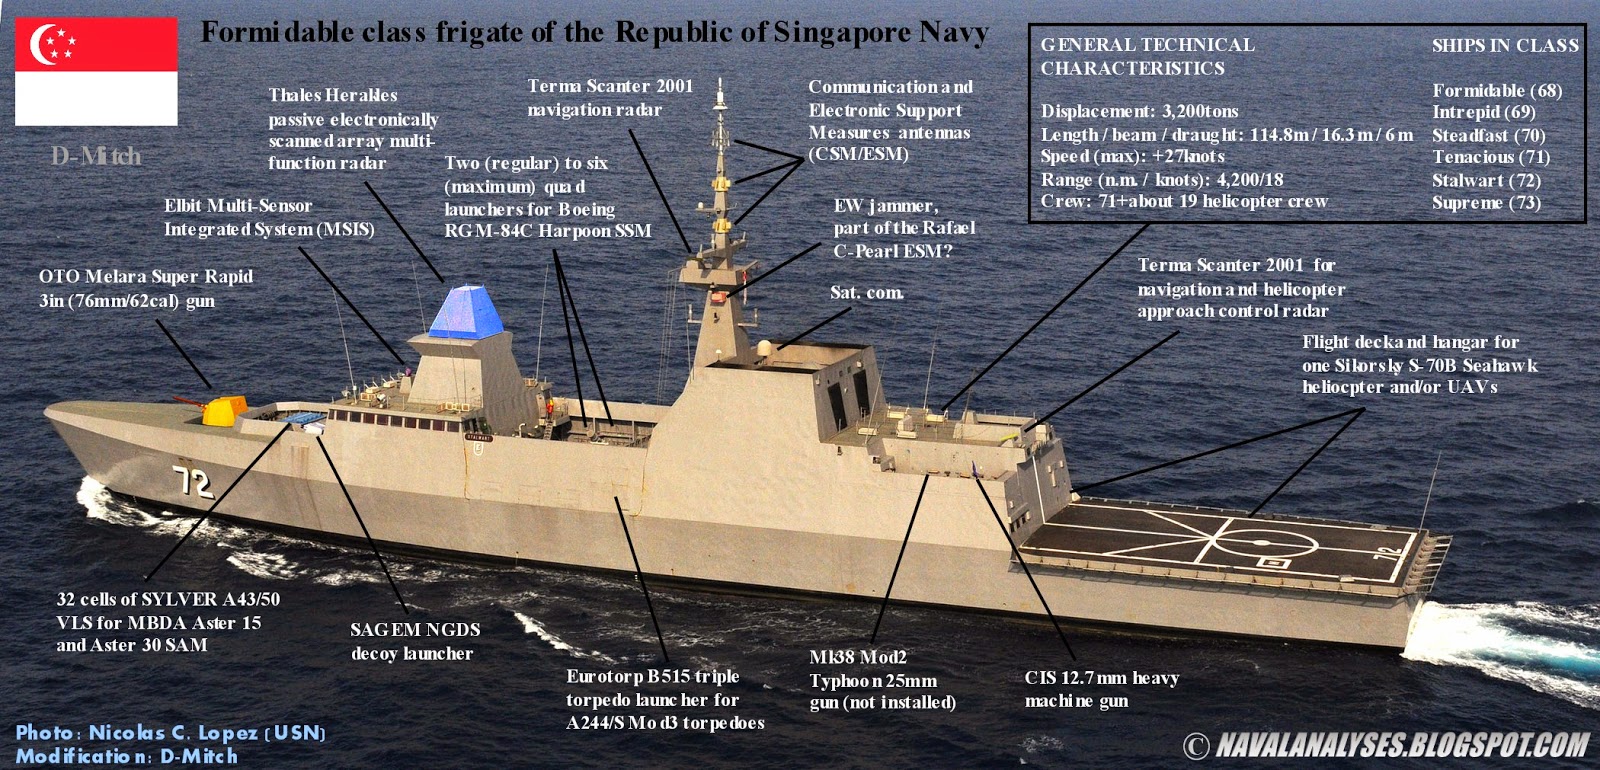 Naval Analyses: Formidable class frigates of the Republic of Singapore Navy